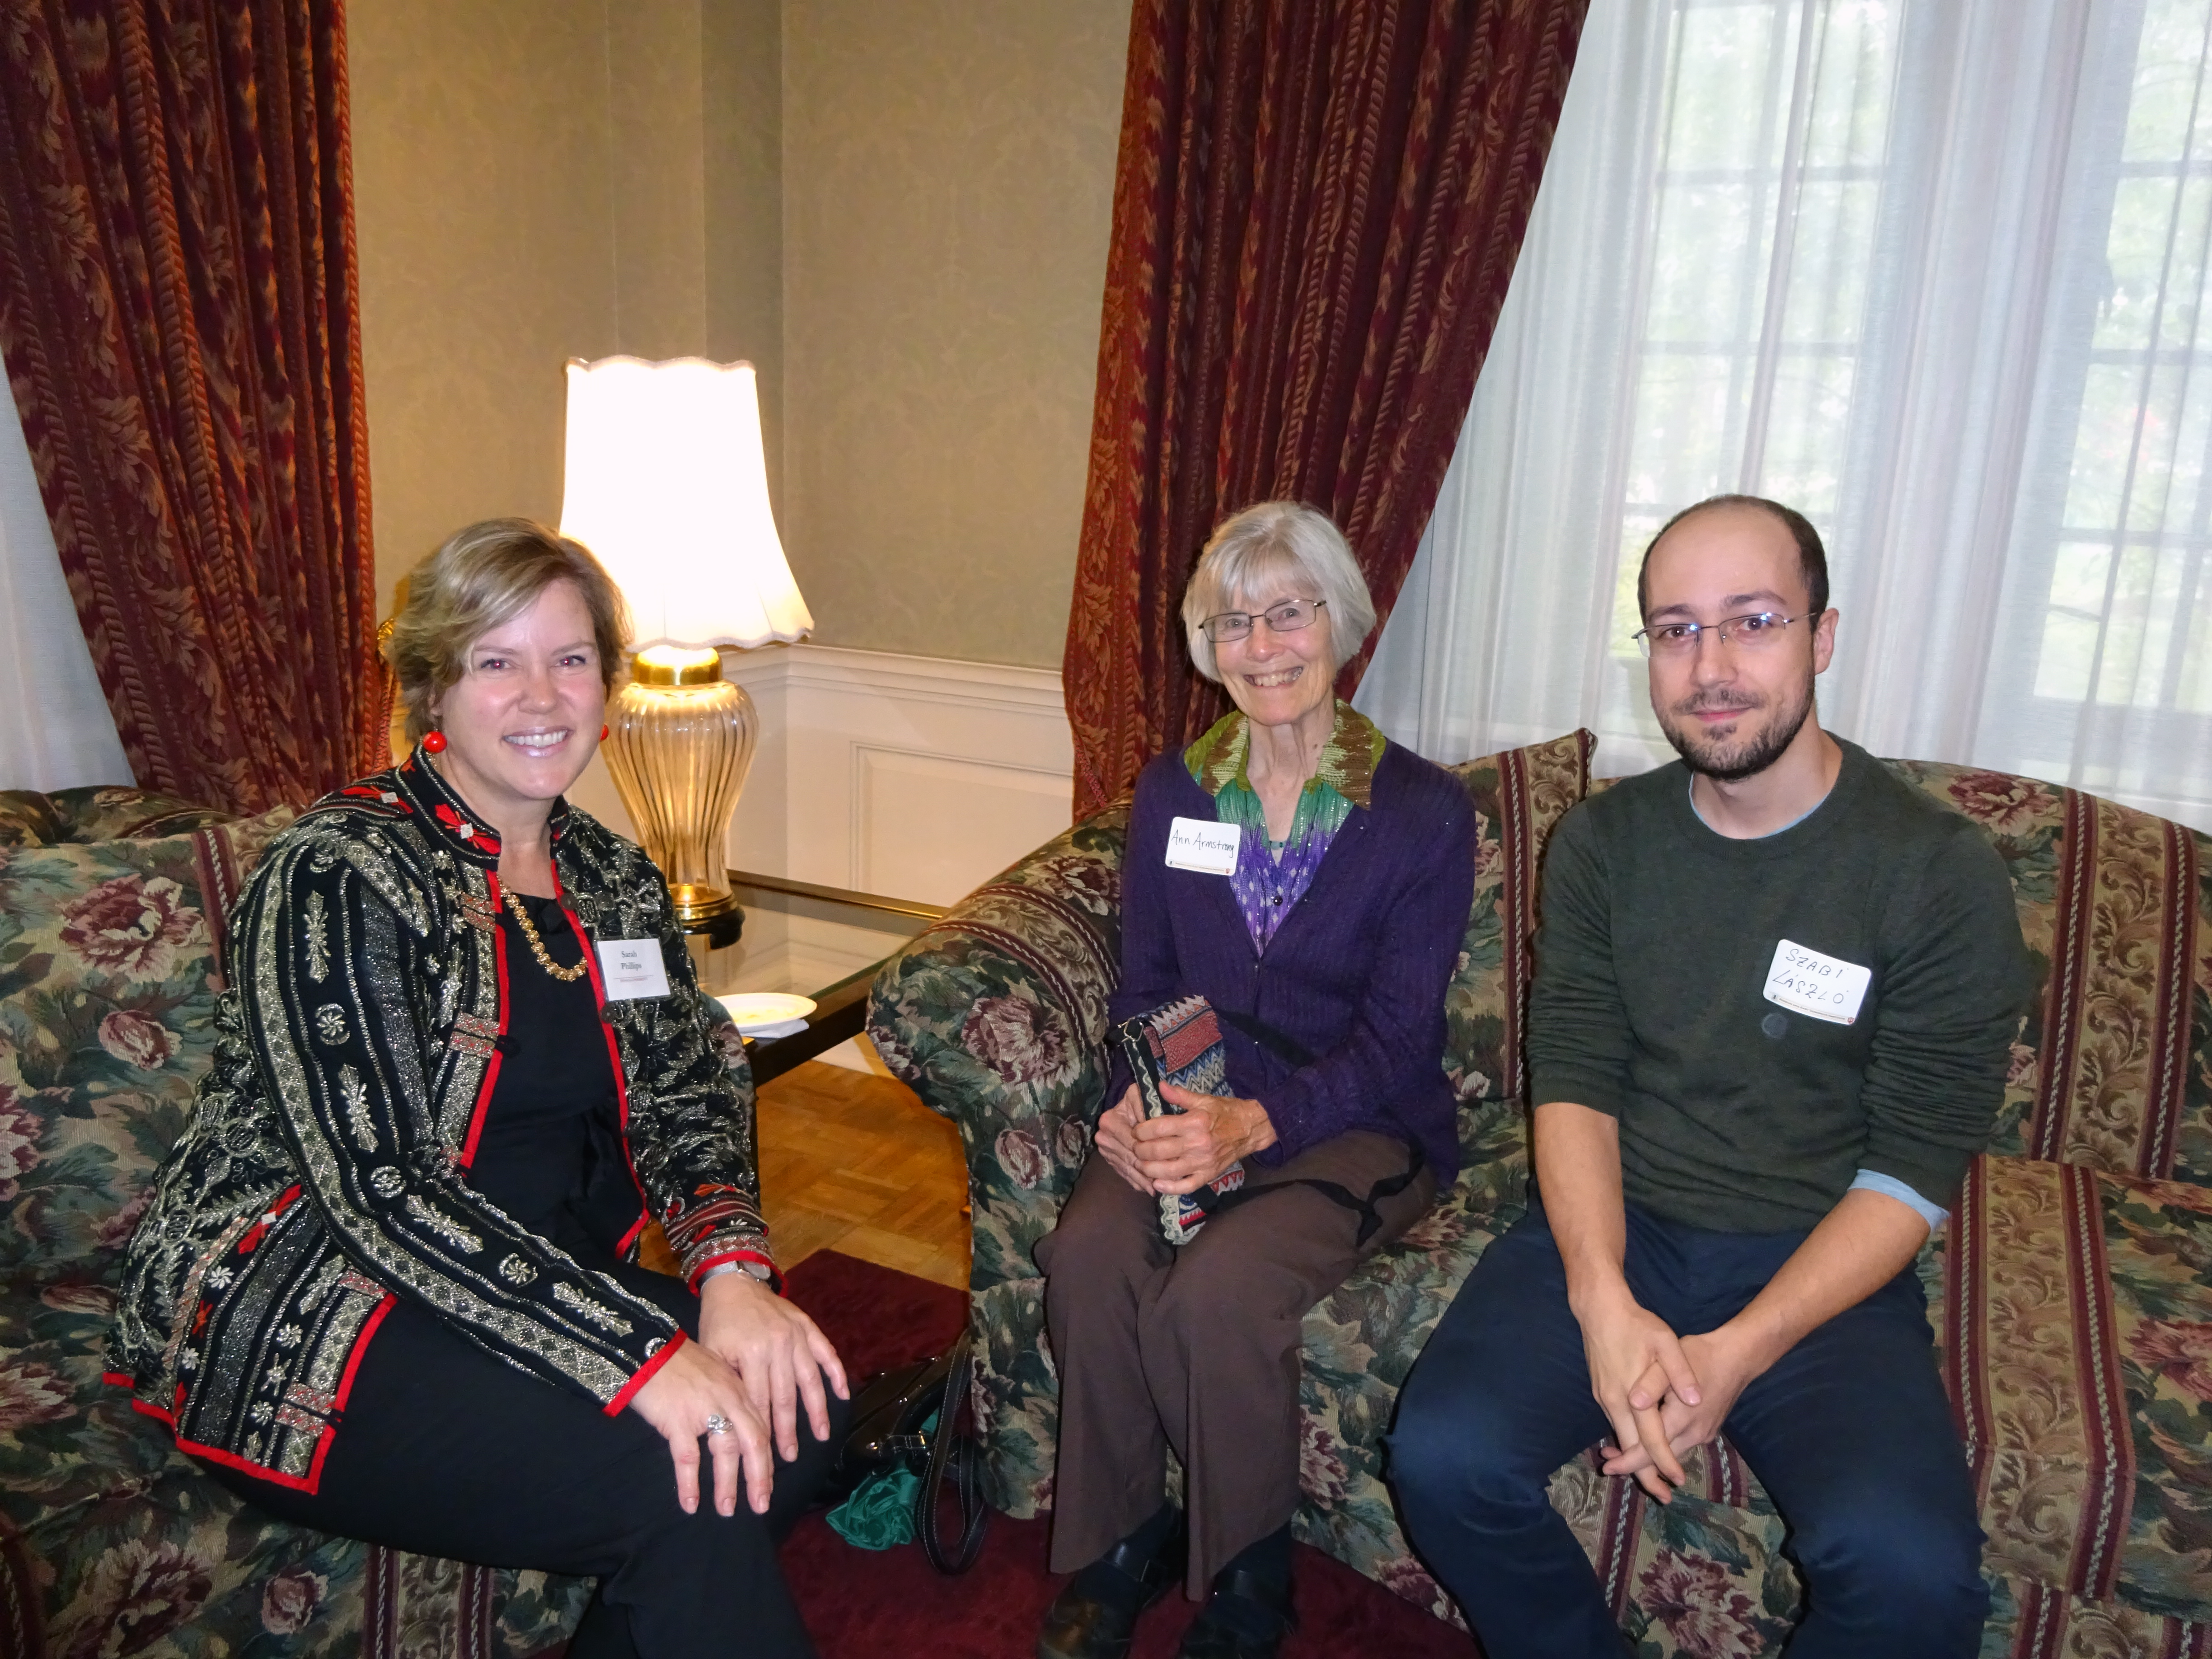 Director Sarah Phillips, Anne Armstrong, and History PhD student Szabolcs Laszlo